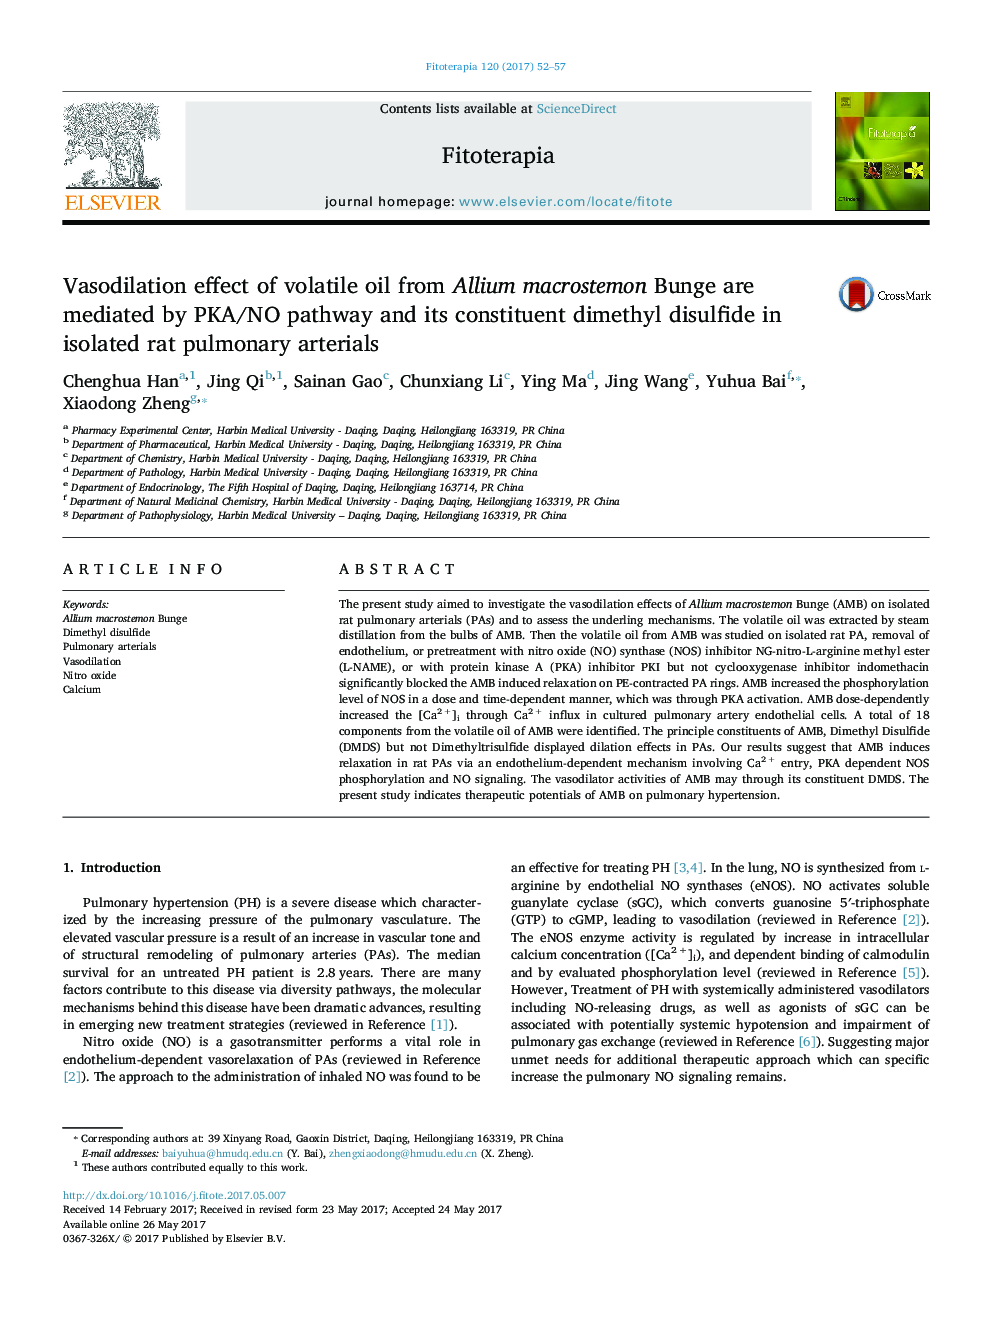 Vasodilation effect of volatile oil from Allium macrostemon Bunge are mediated by PKA/NO pathway and its constituent dimethyl disulfide in isolated rat pulmonary arterials